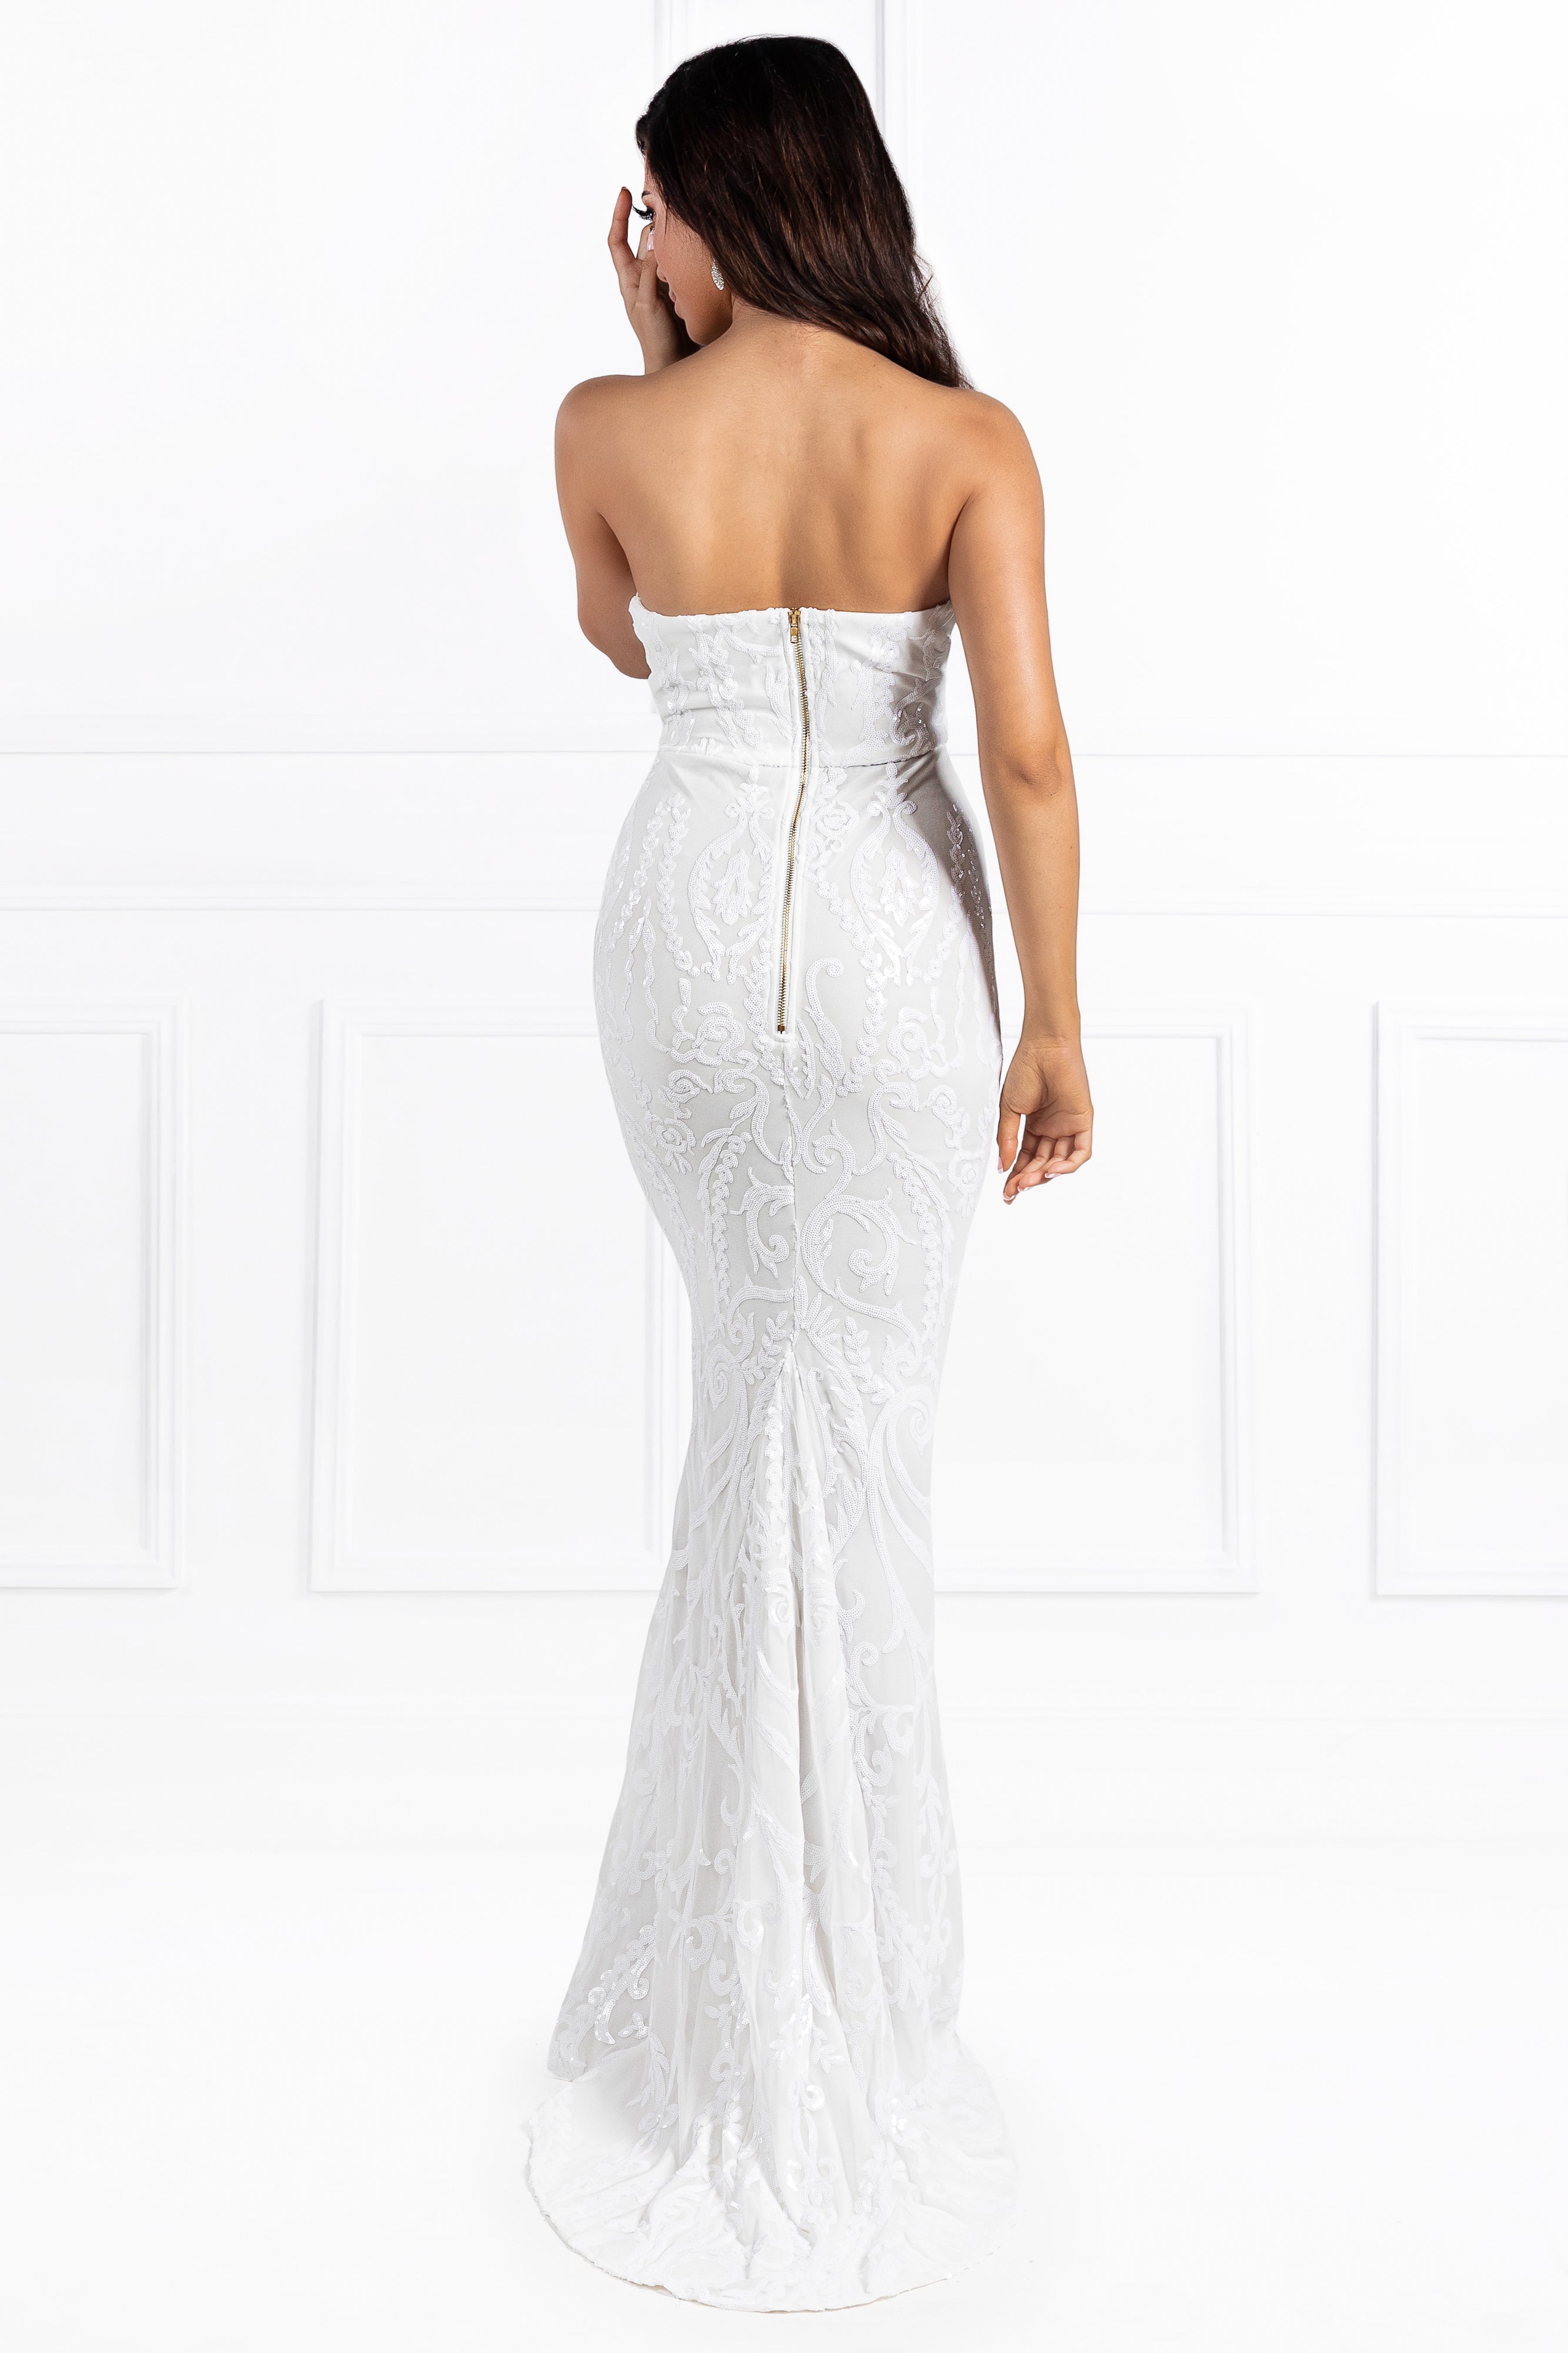 Honey Couture LA ROSA White Strapless Sequin Evening Gown Dress {vendor} AfterPay Humm ZipPay LayBuy Sezzle